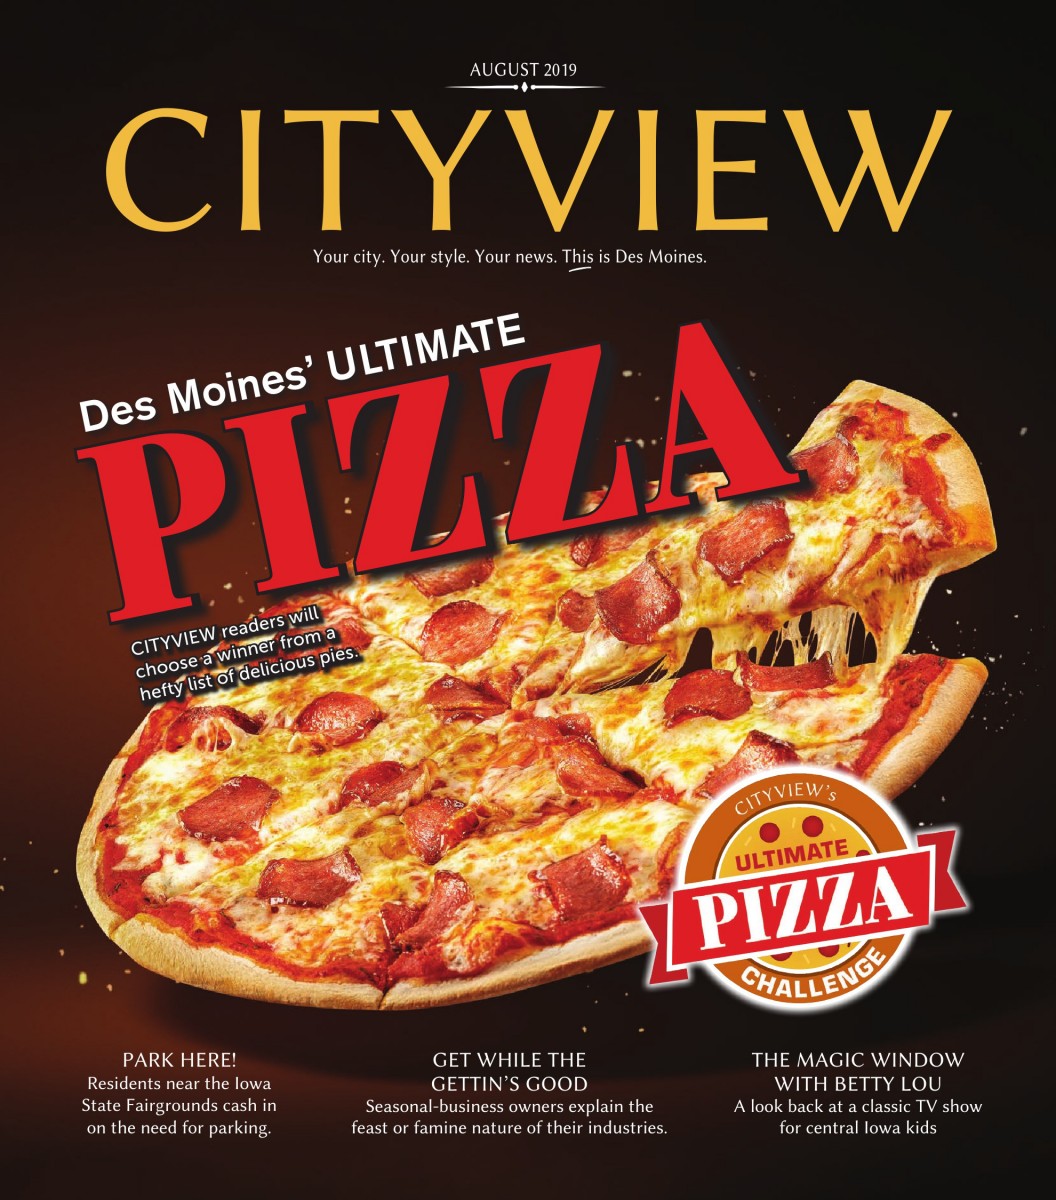 http://www.dmcityview.com/CityviewAugust2019/files/pages/tablet/1.jpg